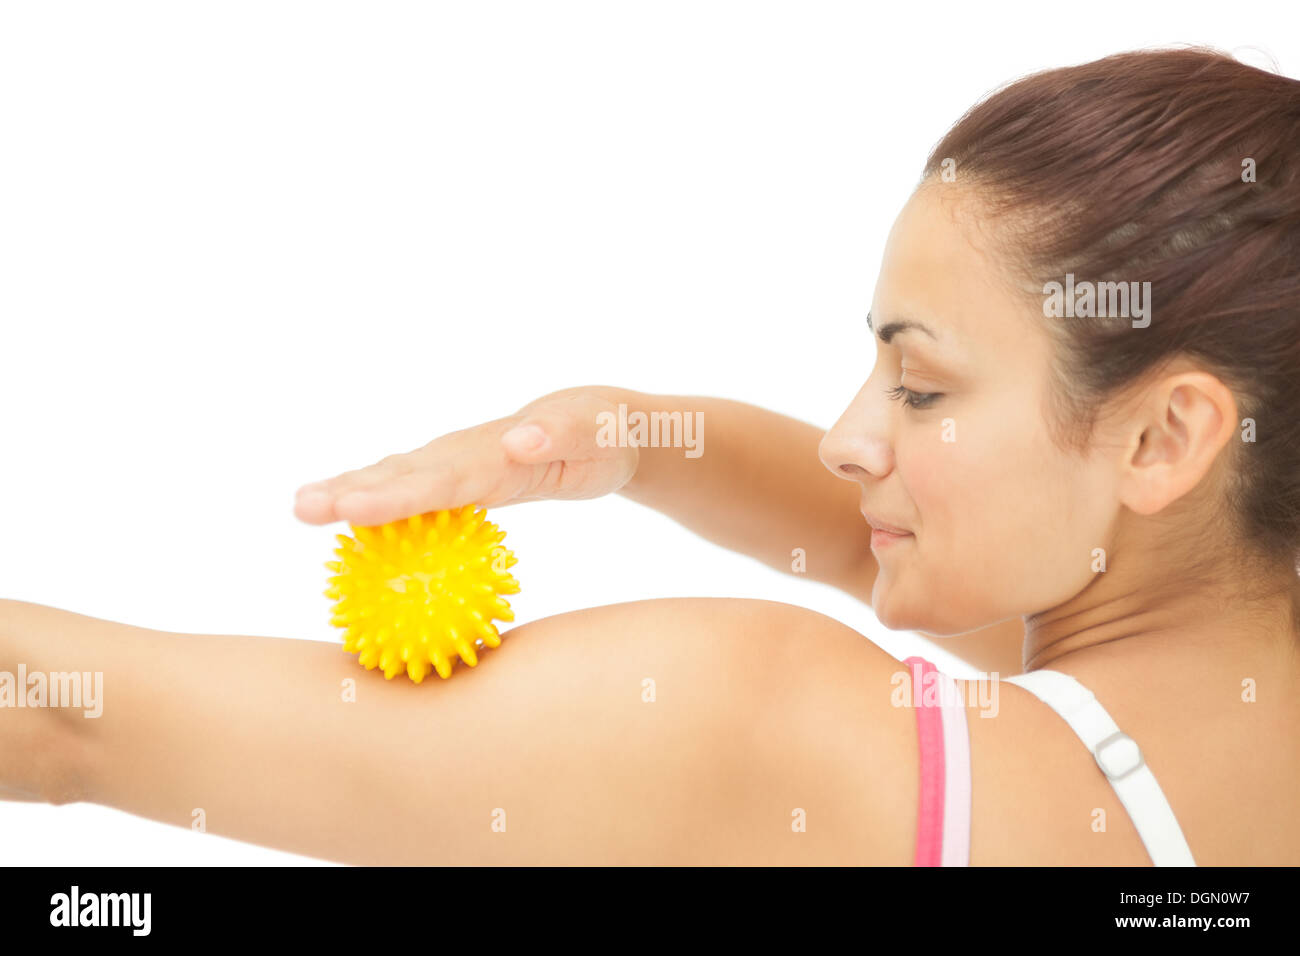 Calm sporty brunette touching arm with yellow massage ball Stock Photo